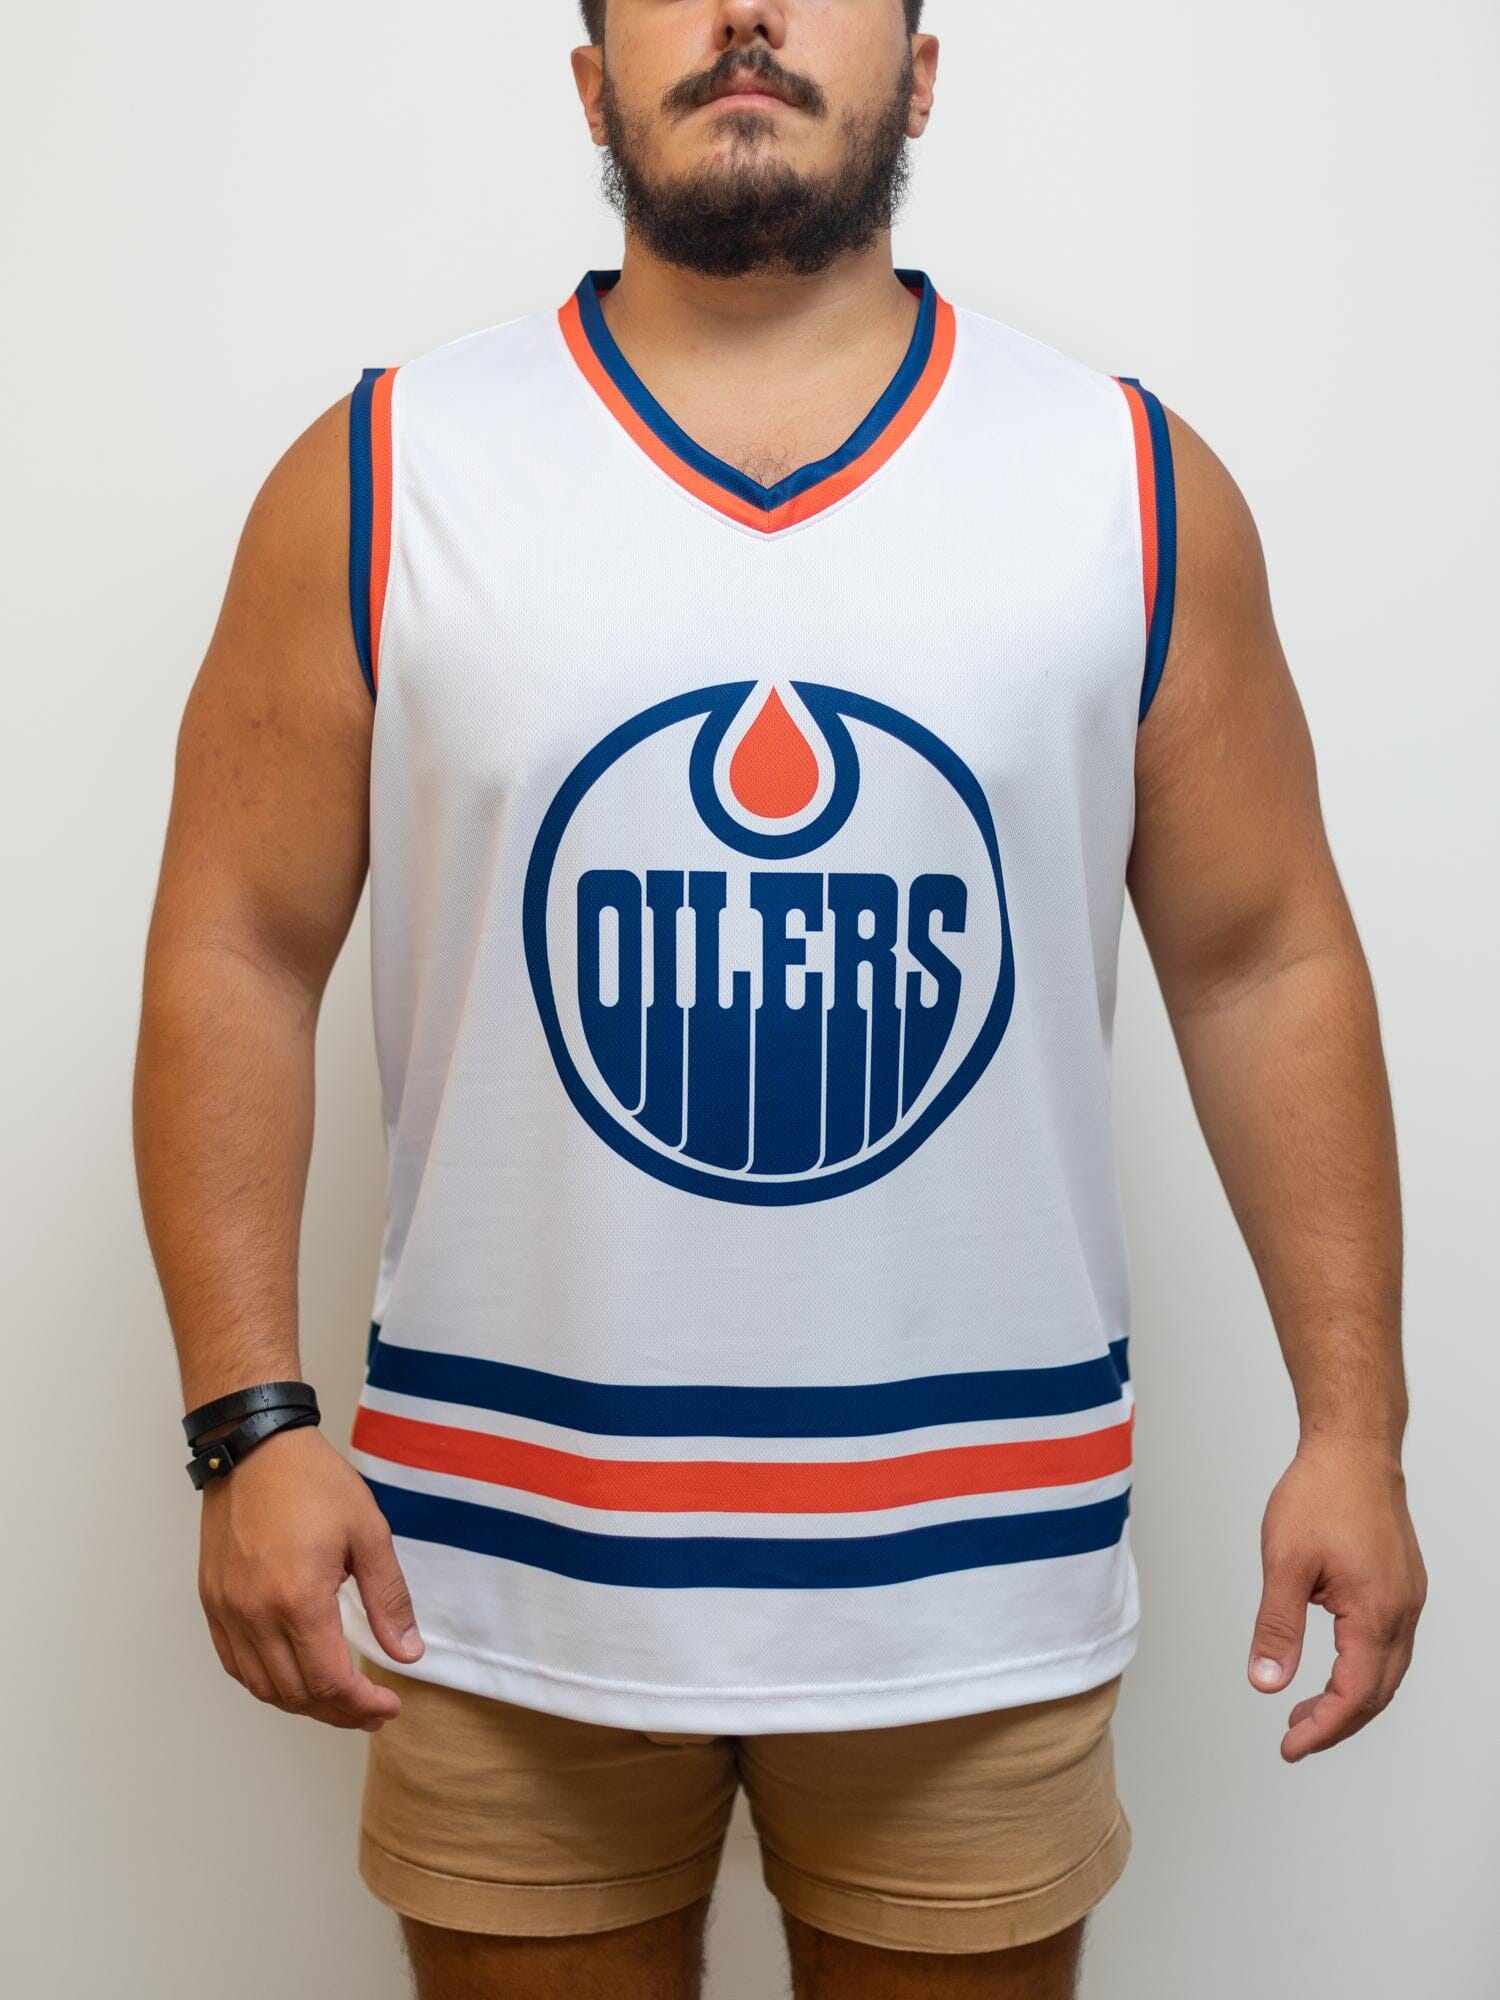 Edmonton Oilers - The Official #Oilers Team Store is now